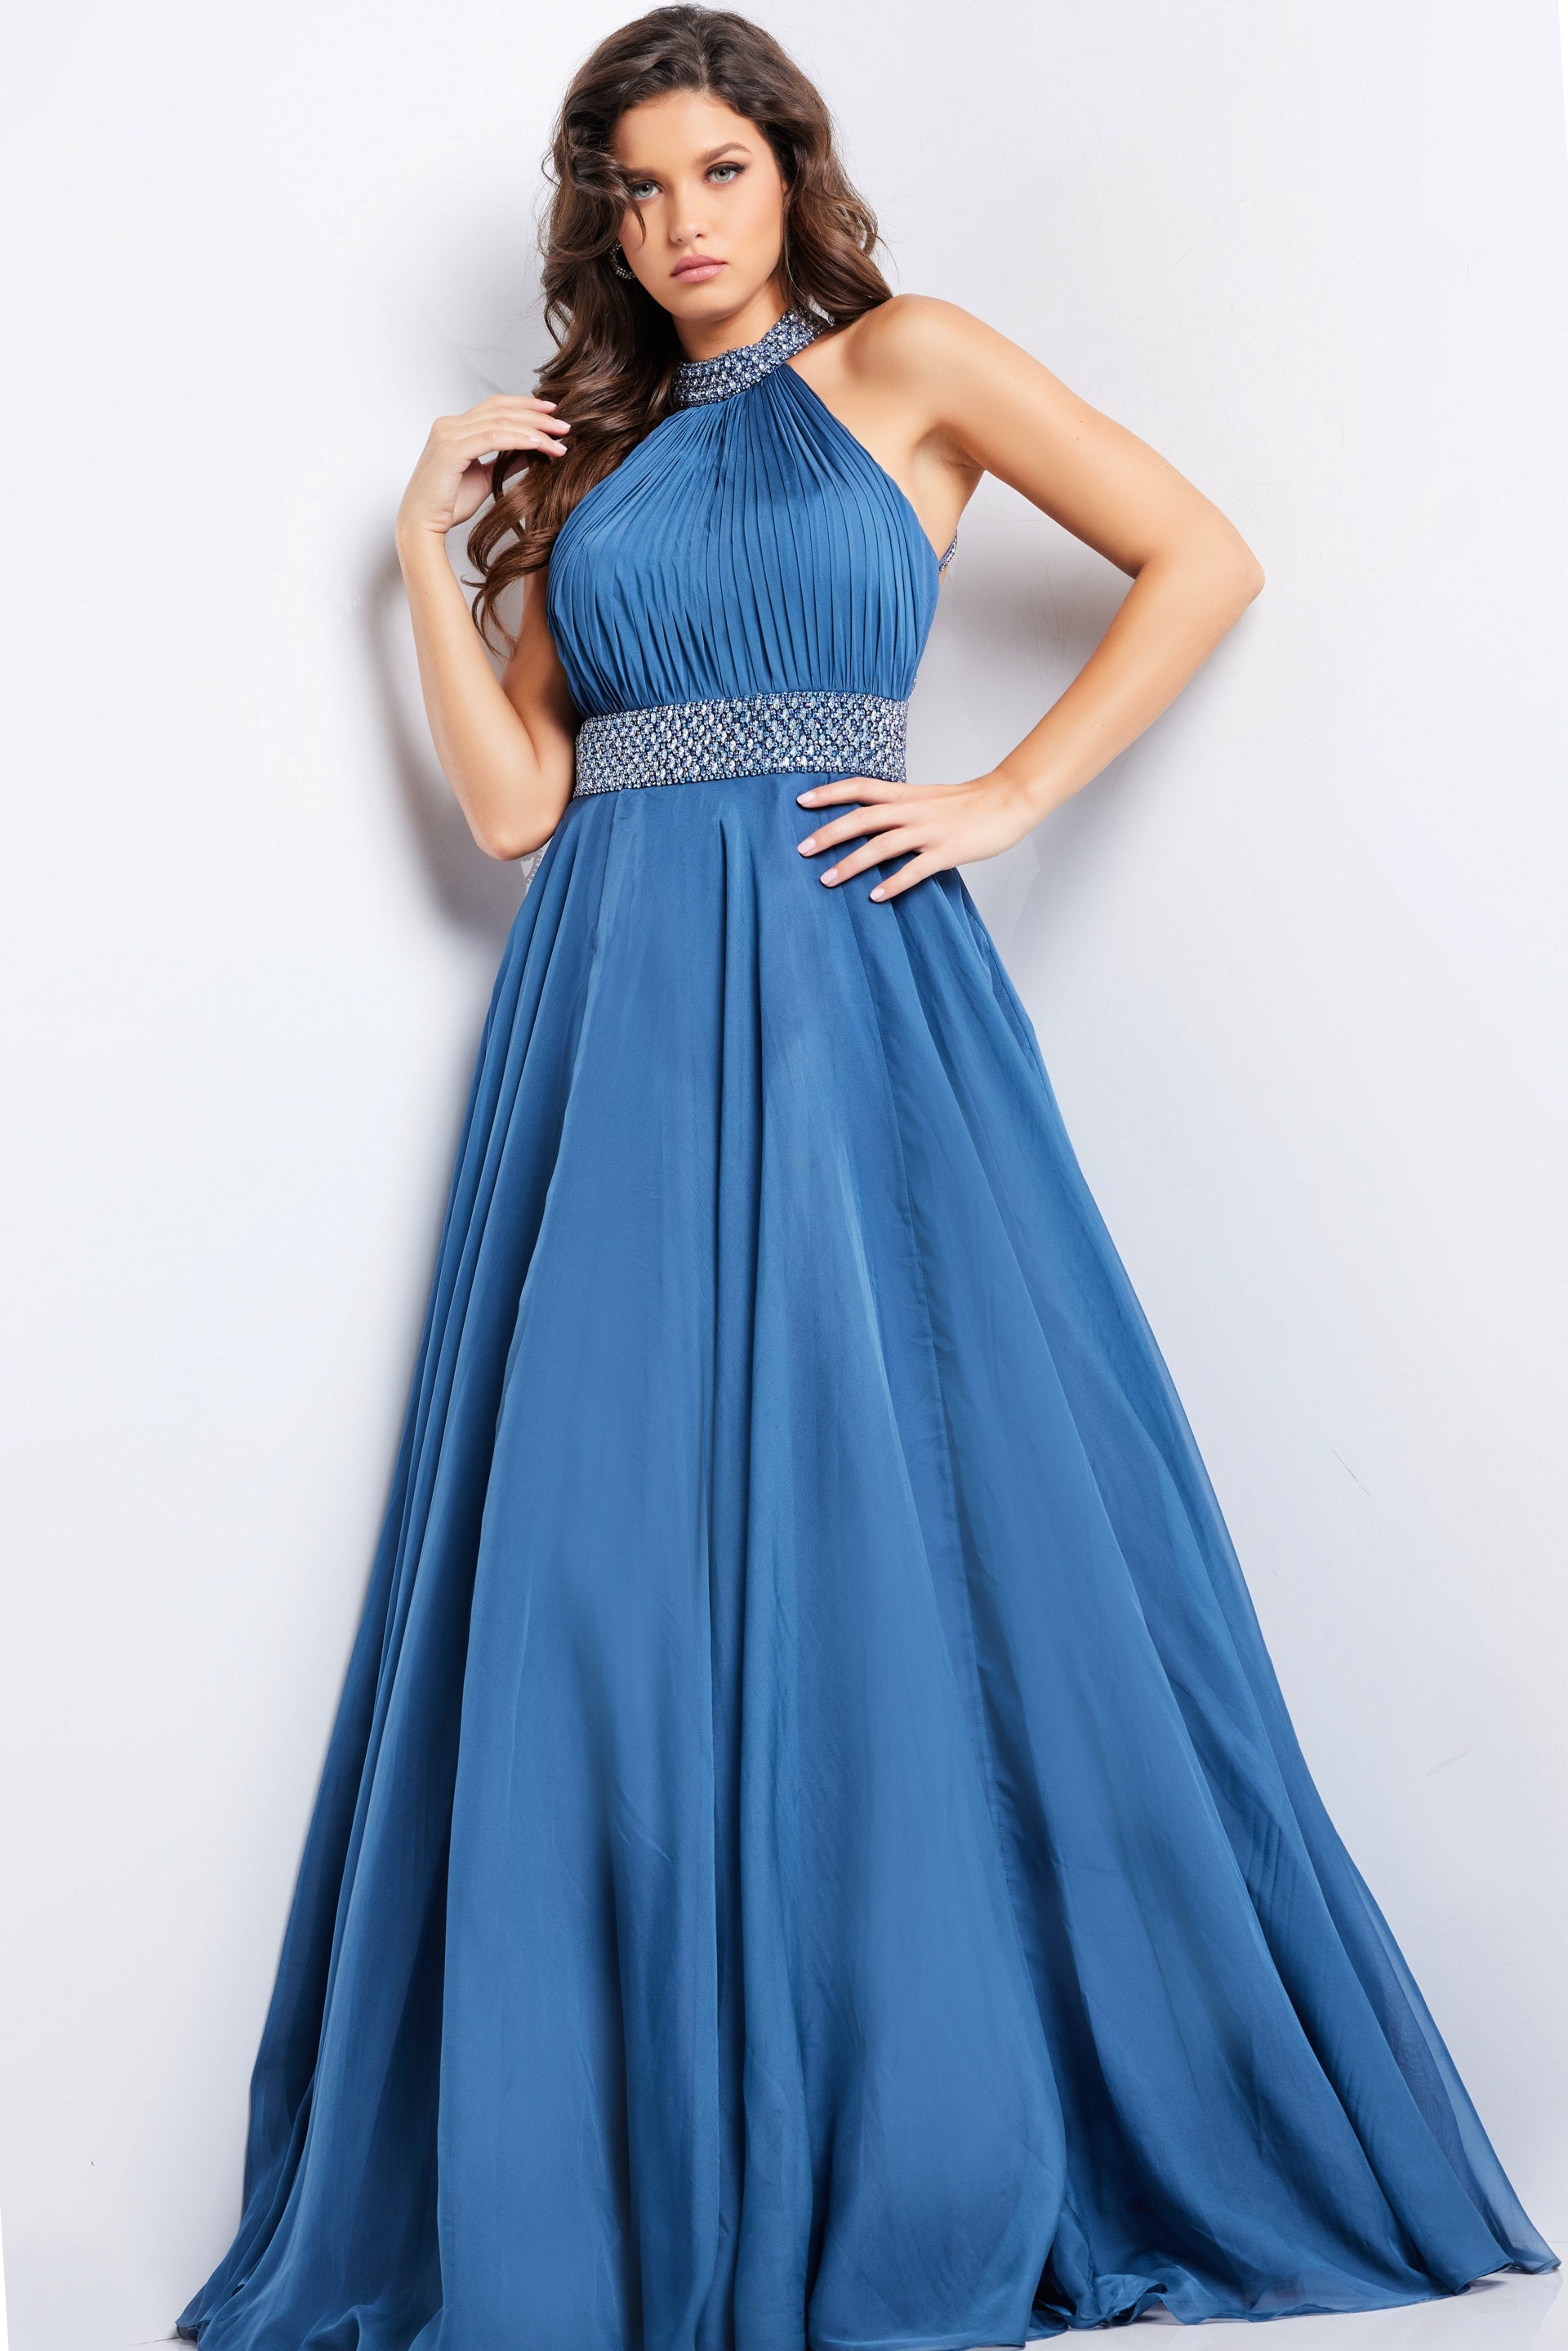 Prom Dresses Long Formal Prom Ball Gown Dark Navy